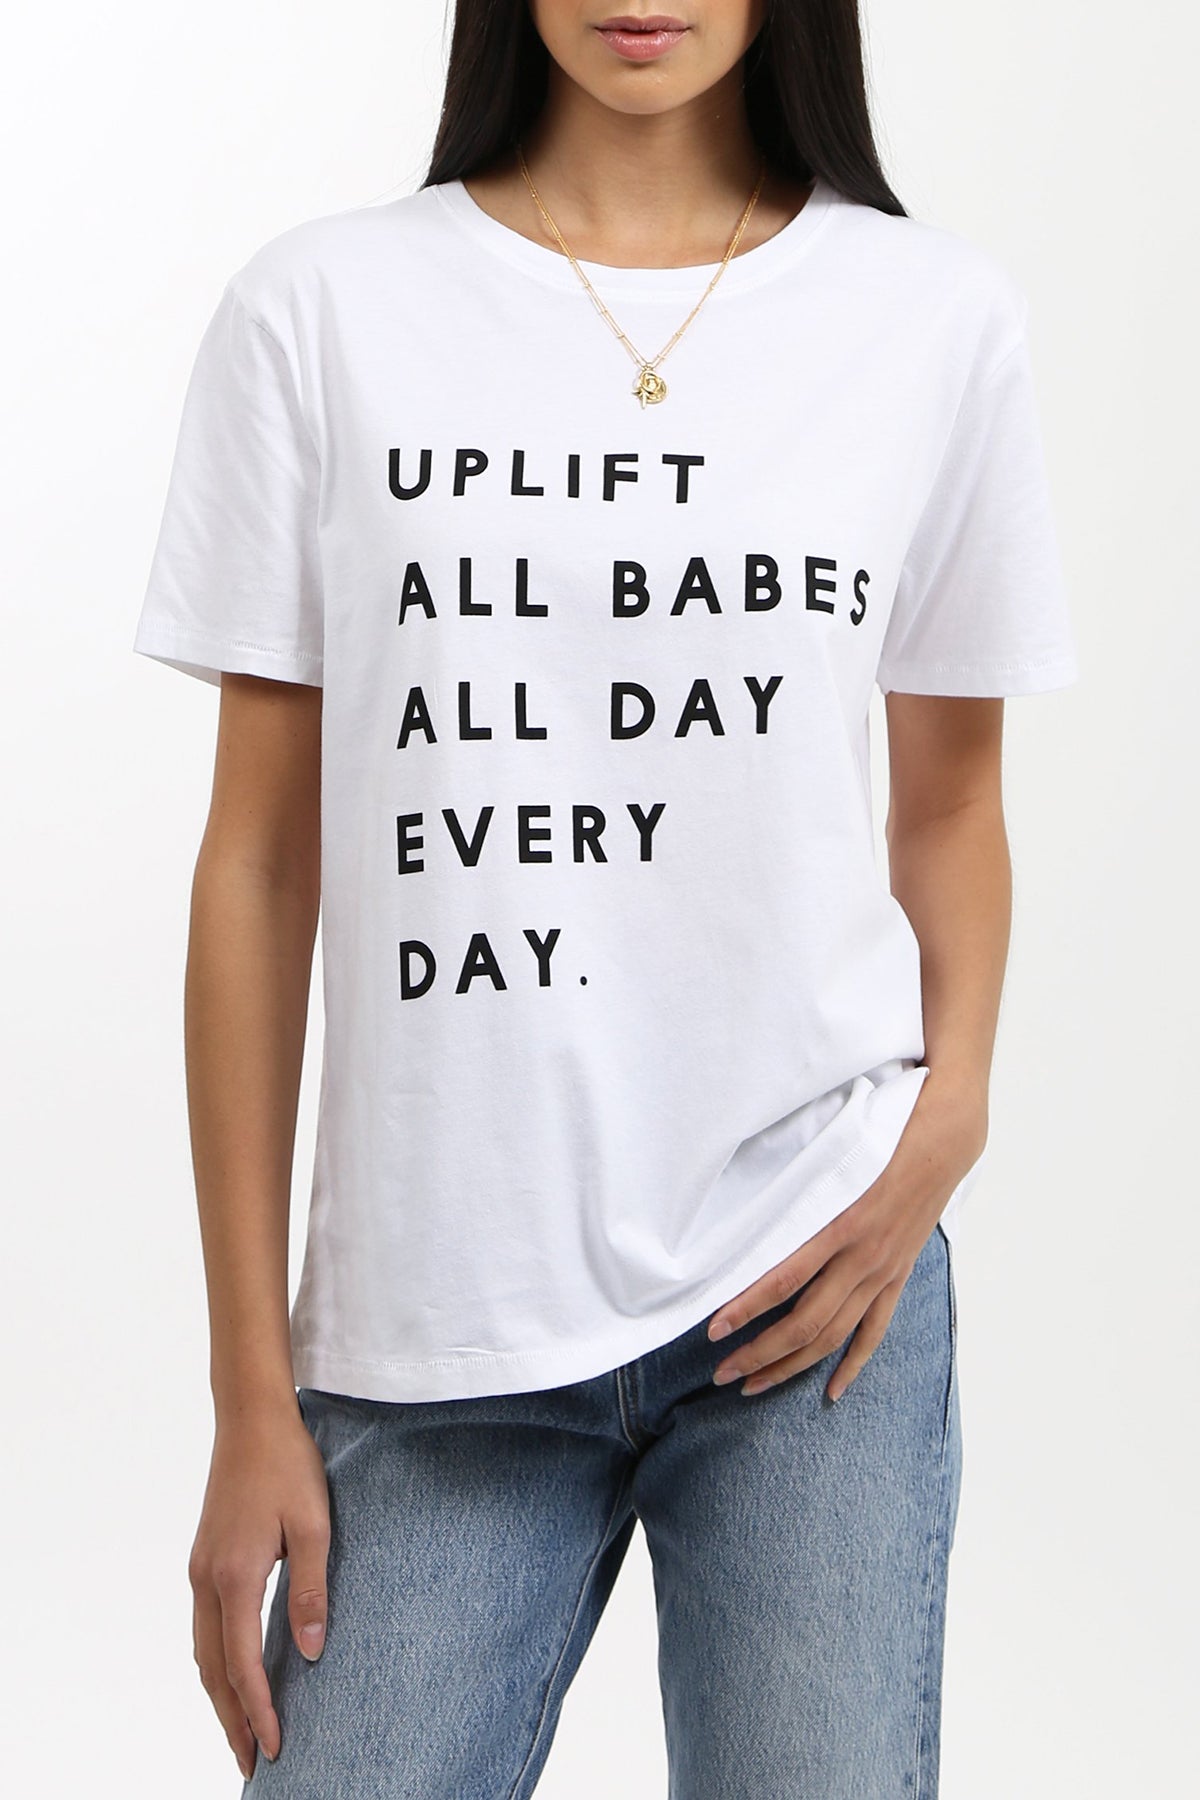 The UPLIFT ALL BABES Classic Crew Neck Tee